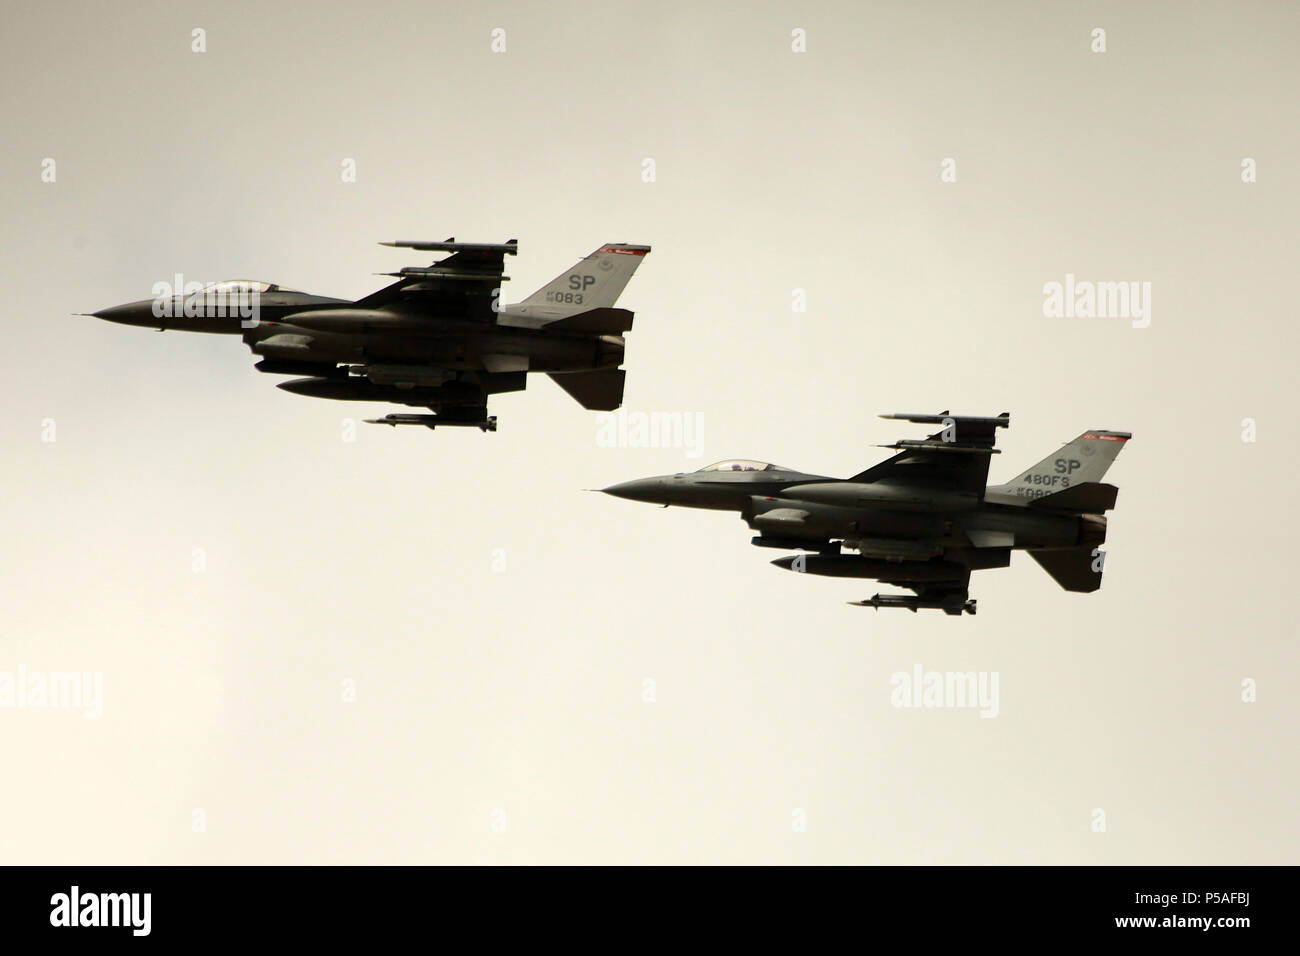 General Dynamics F-16C Fighting Falcon Banque D'Images